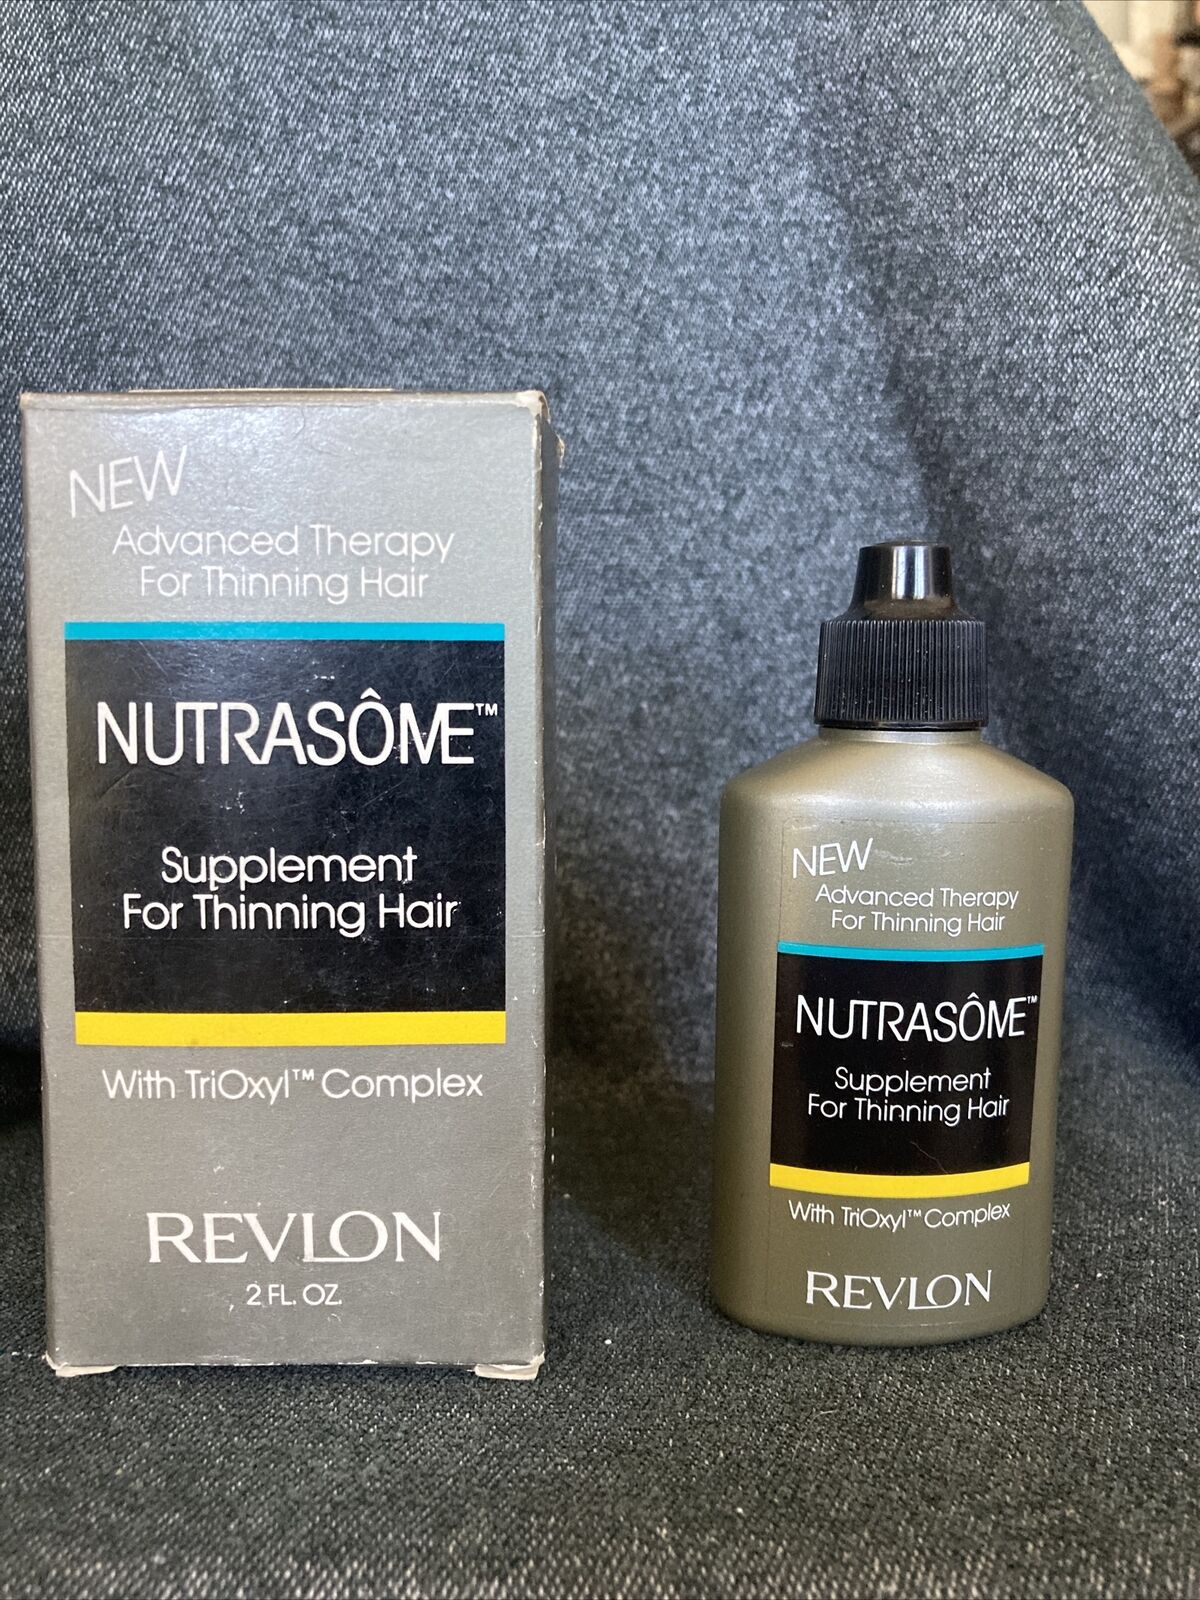 Vintage Revlon Nutrasome Advance Therapy for Thinning Hair w/ TriOxyl Complex